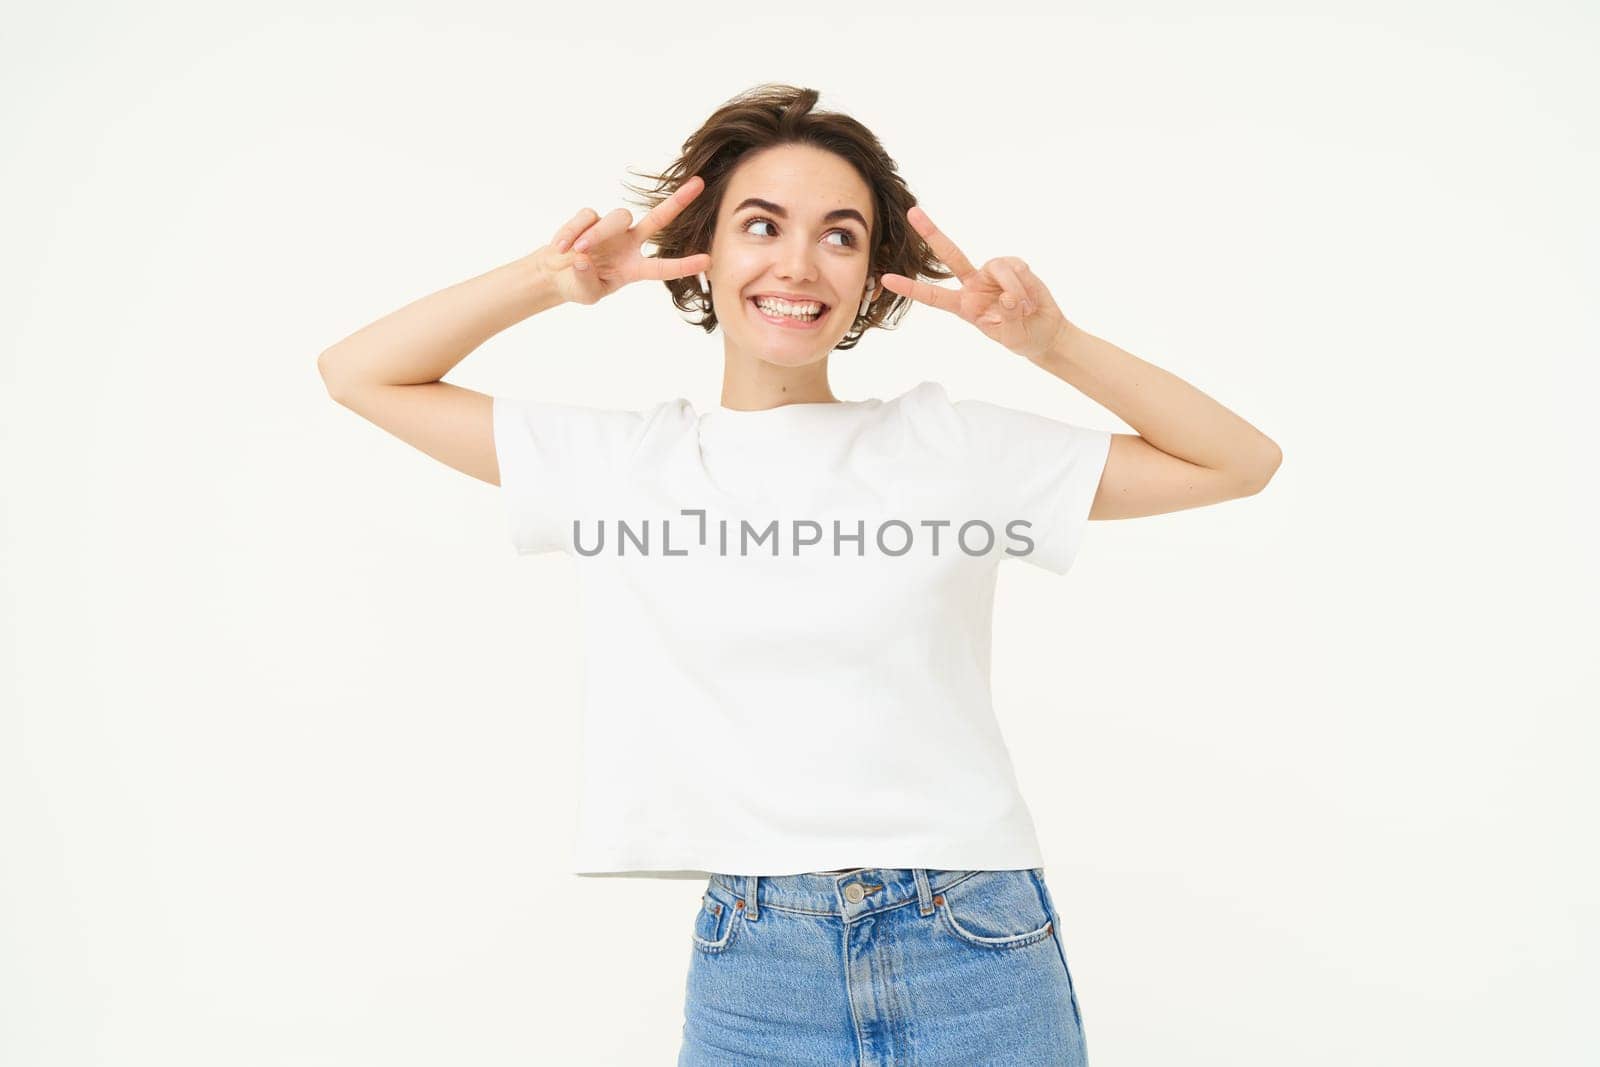 Happy smiling woman, showing peace, v-sign gesture and listening to music in wireless headphones, posing over white background. Copy space